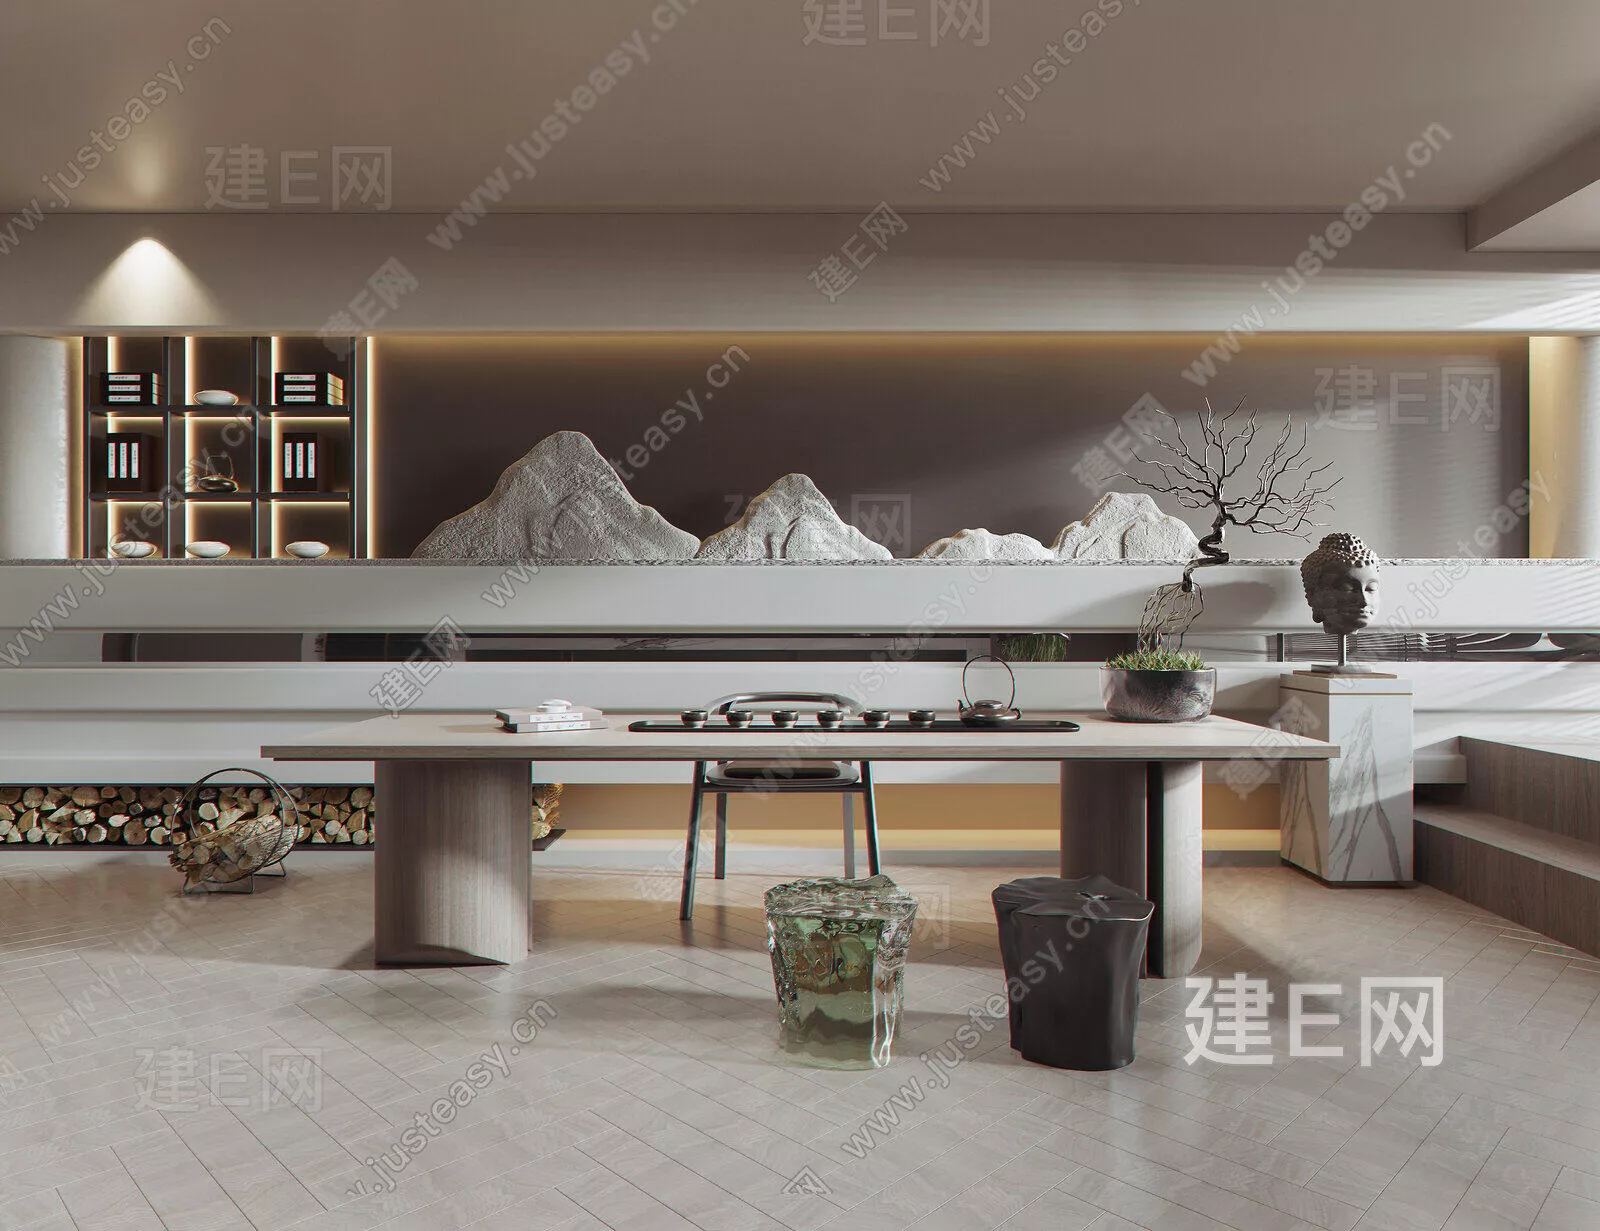 CHINESE TEAROOM - SKETCHUP 3D SCENE - ENSCAPE - 104417230